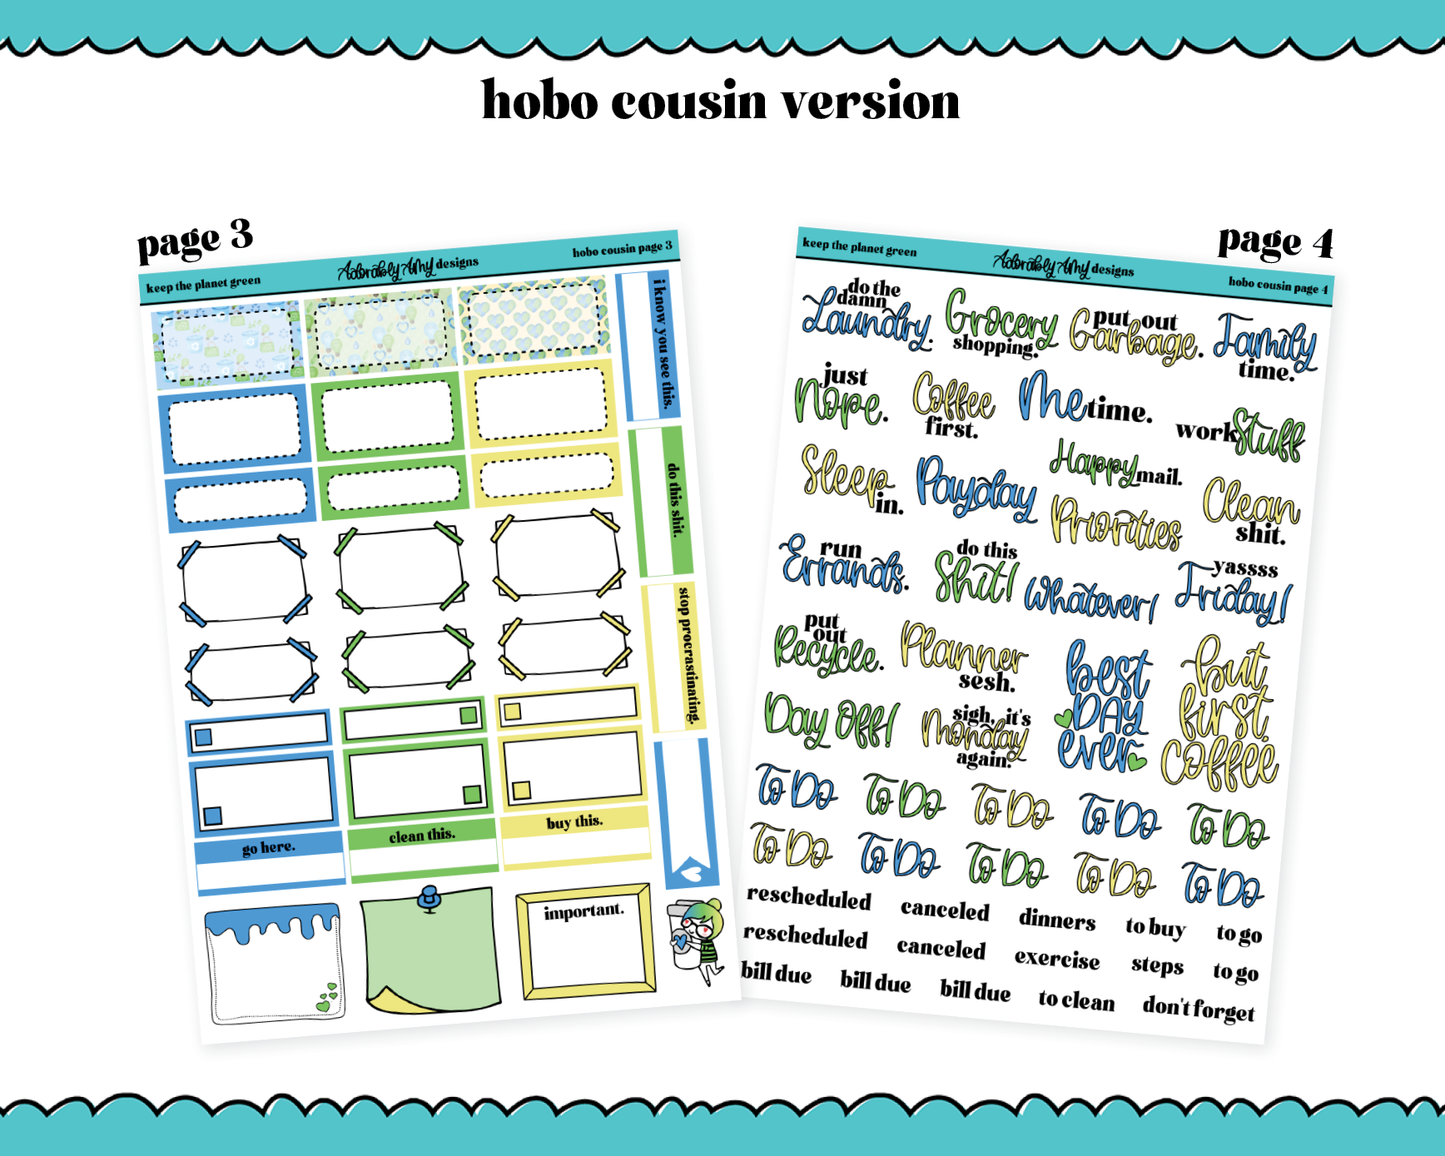 Hobonichi Cousin Weekly Keep the Planet Green Watercolor Planner Sticker Kit for Hobo Cousin or Similar Planners